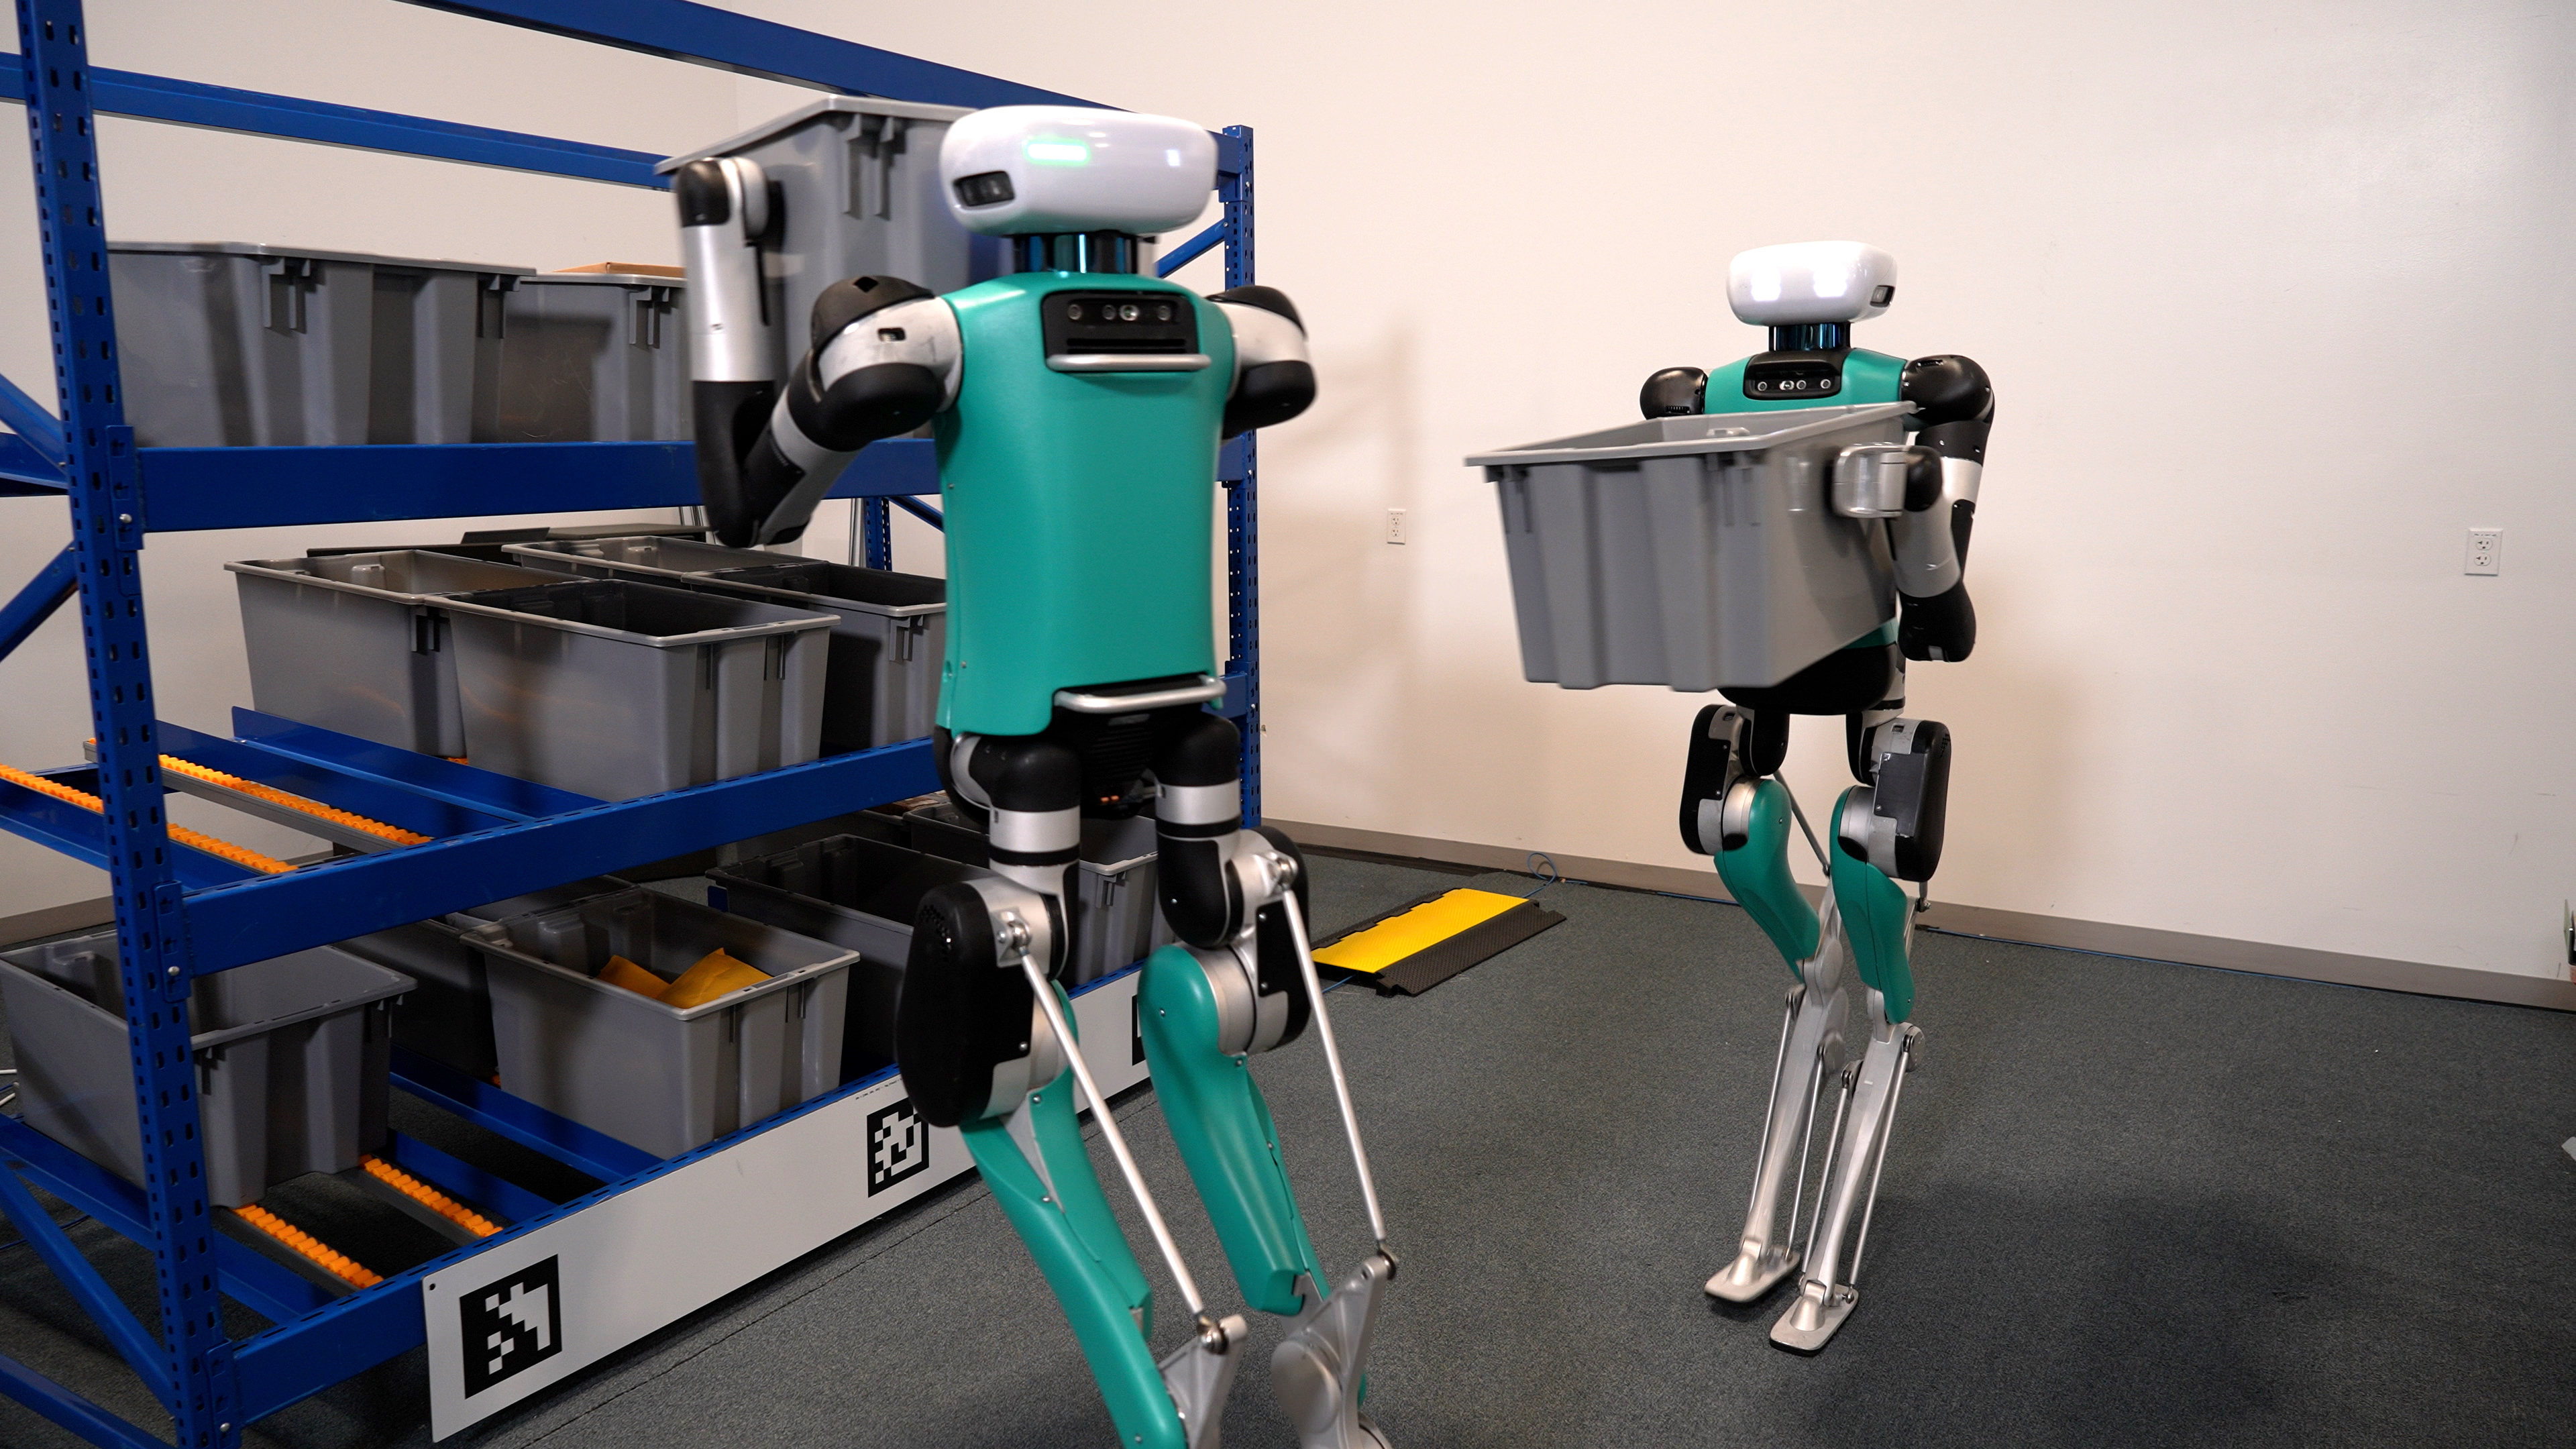 A general-purpose robot is entering the workforce